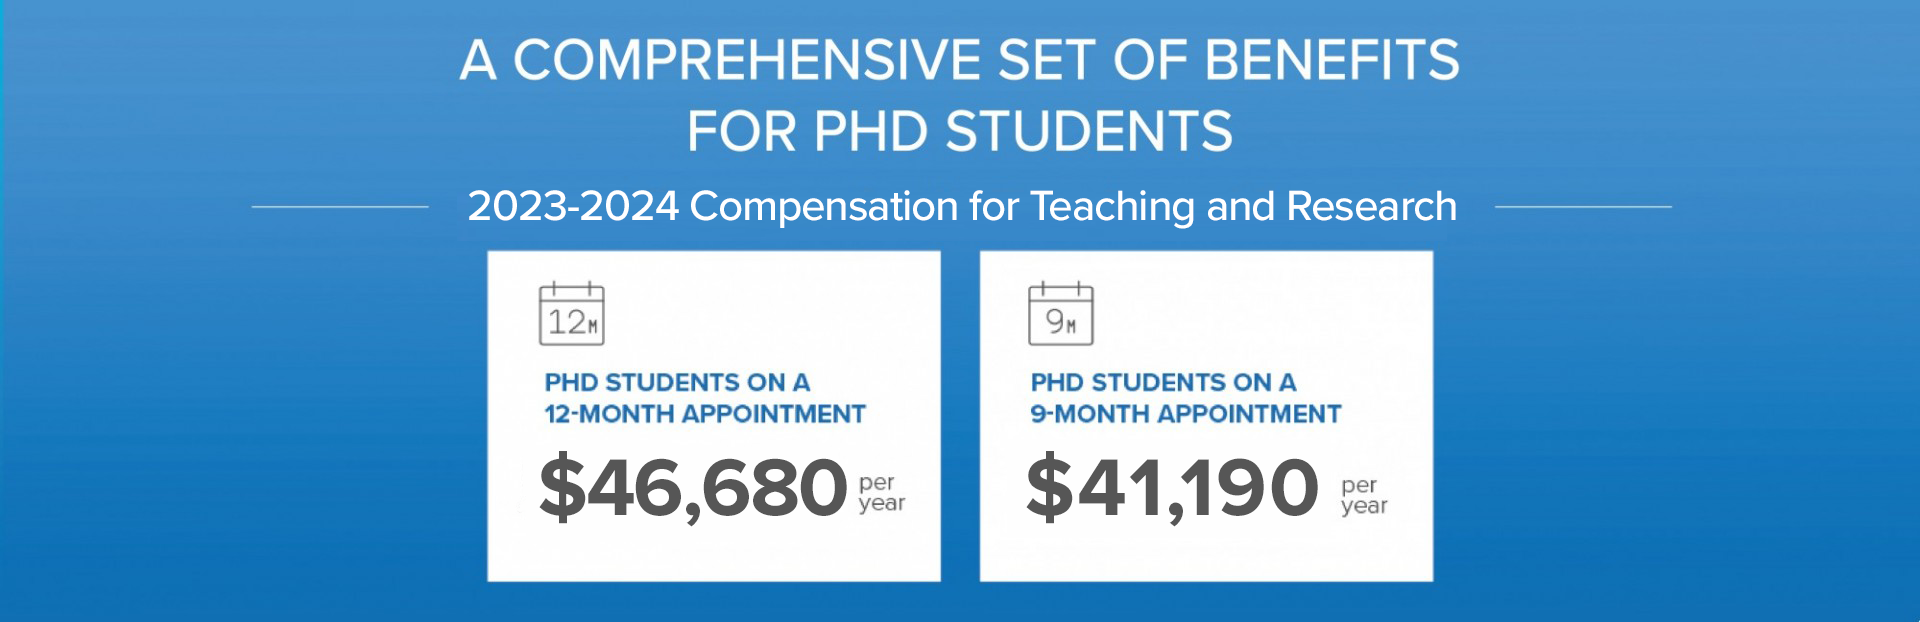 A Comprehensive Set of Benefits for PhD Students 2023-2024 Compensation for Teaching and Research PhD Students on a 12-Month Appointment $41,190 per year; PhD Students on a 9-Month Appointment